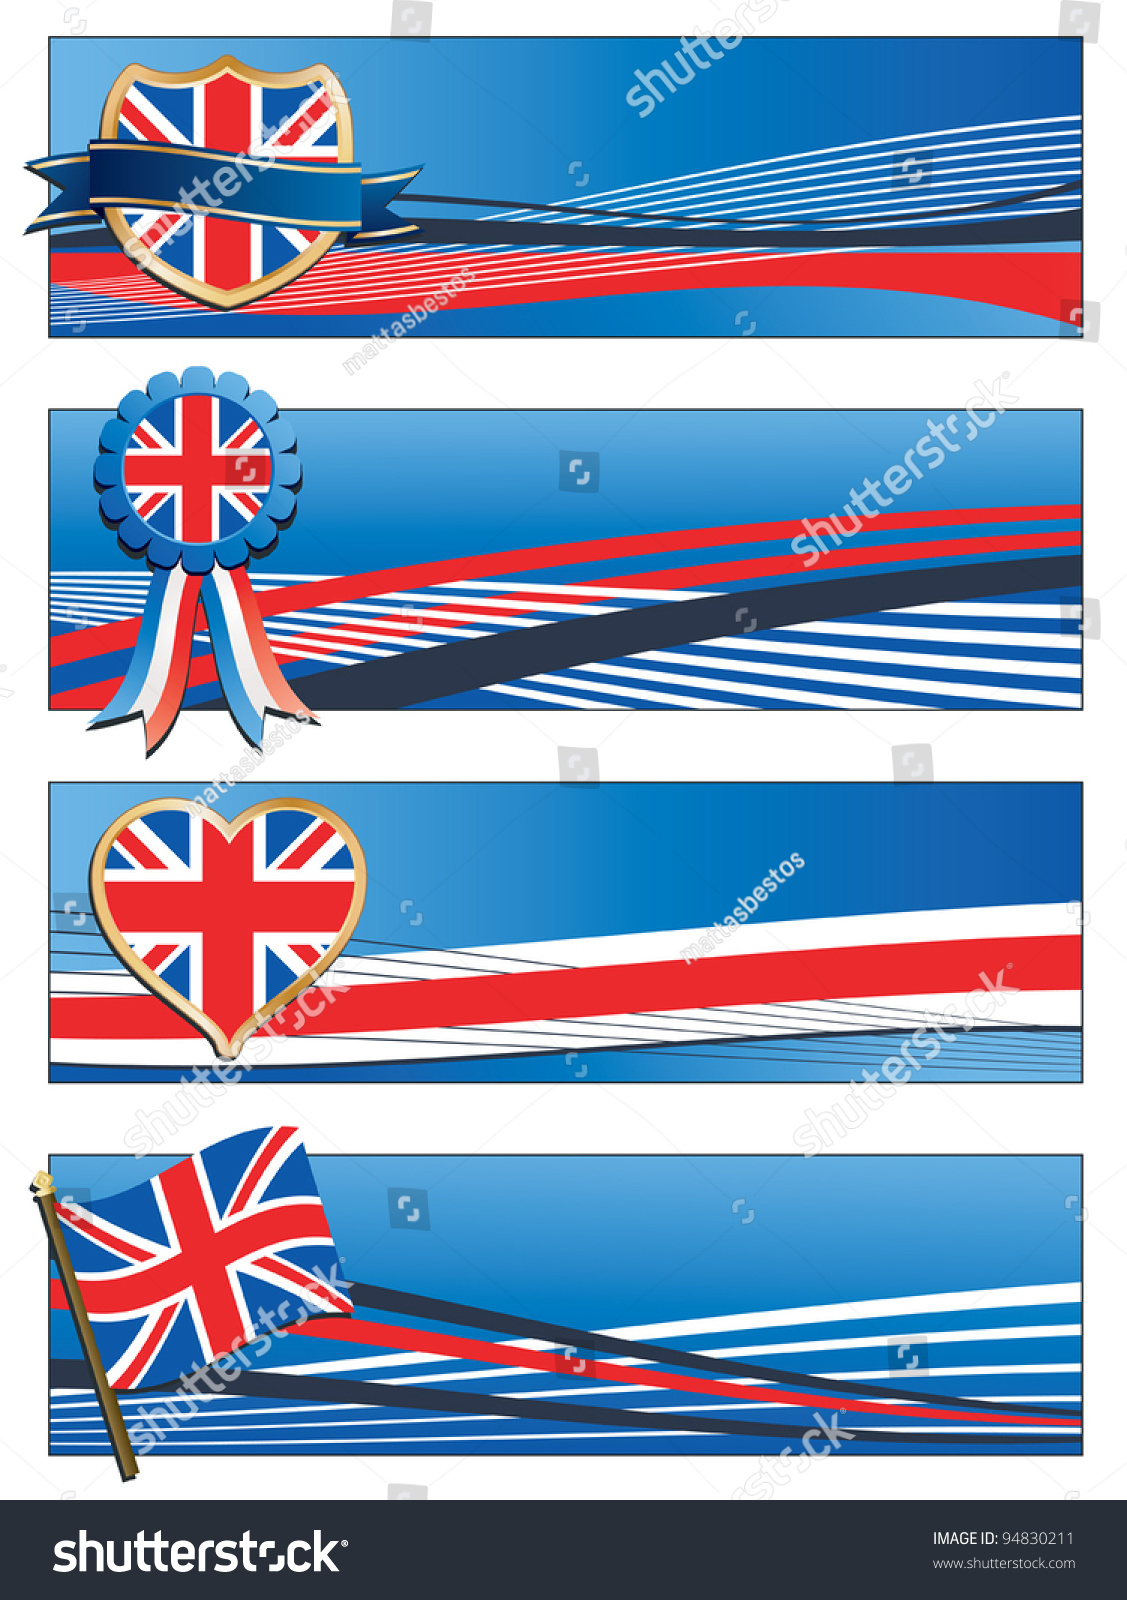 SVG of horizontal united kingdom banners with motifs isolated on white svg